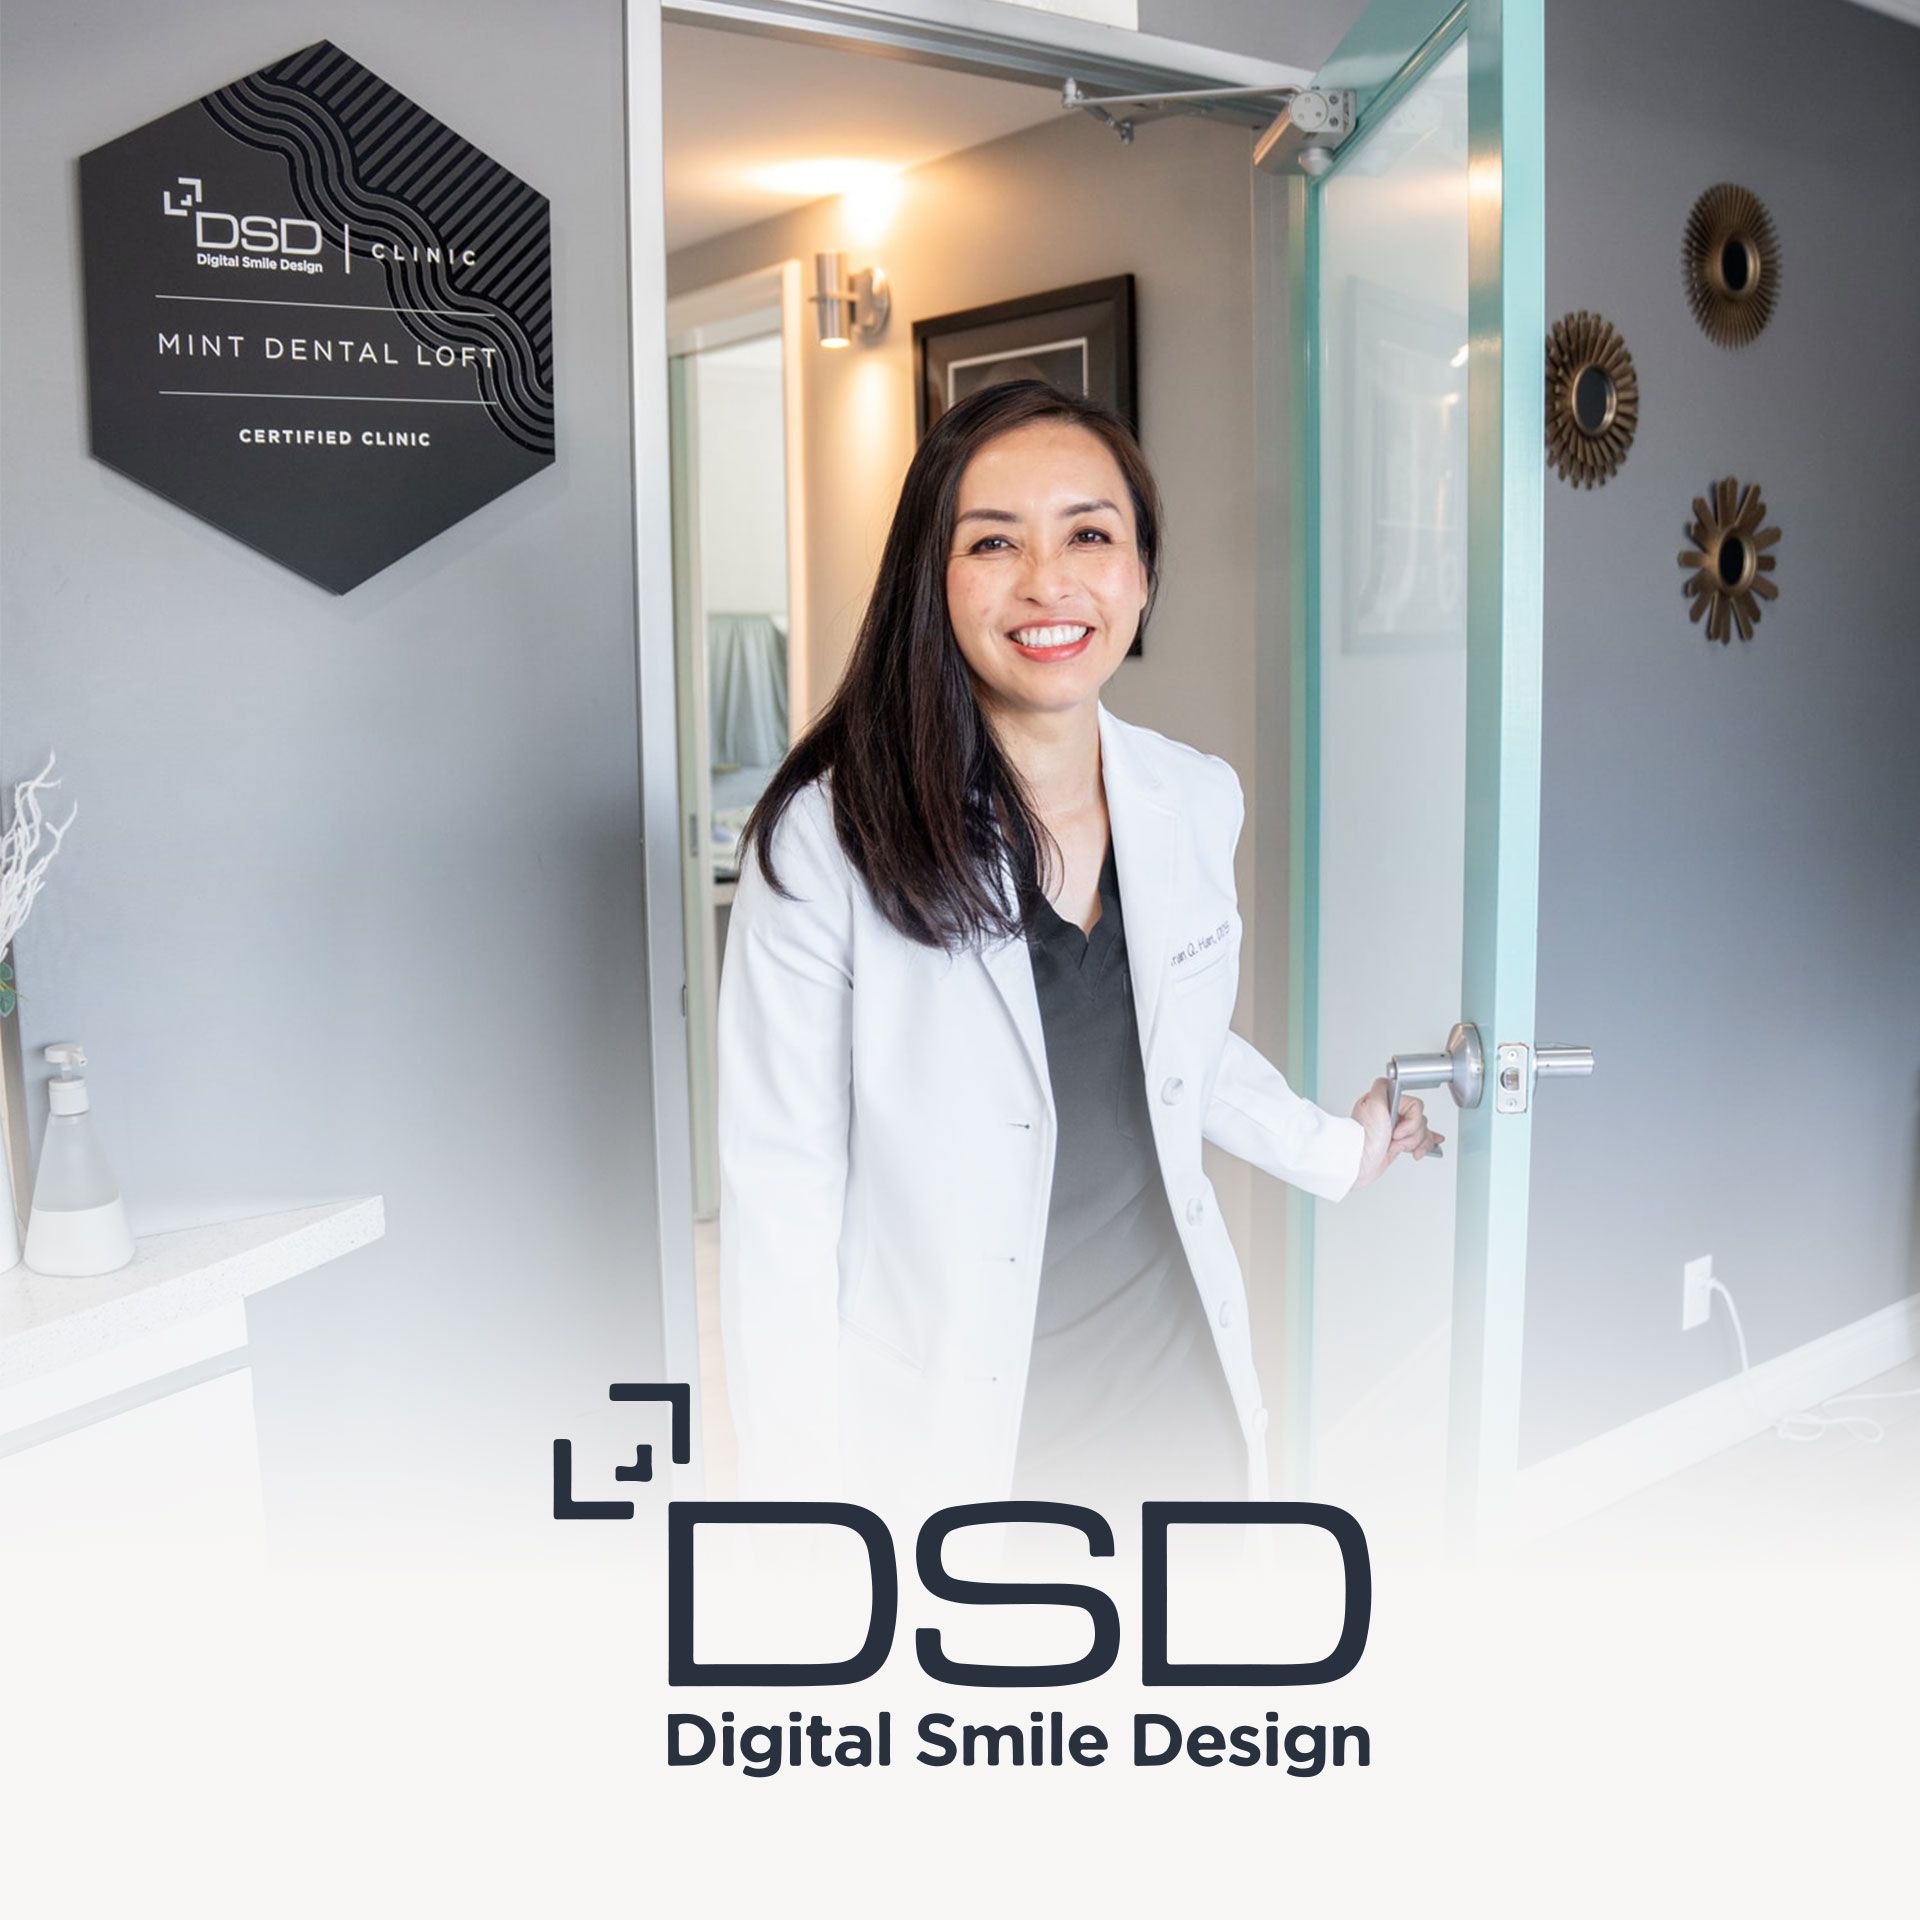 An image of Dr. Han opening a door to the office with the Digital Smile Design logo overlayed on the image